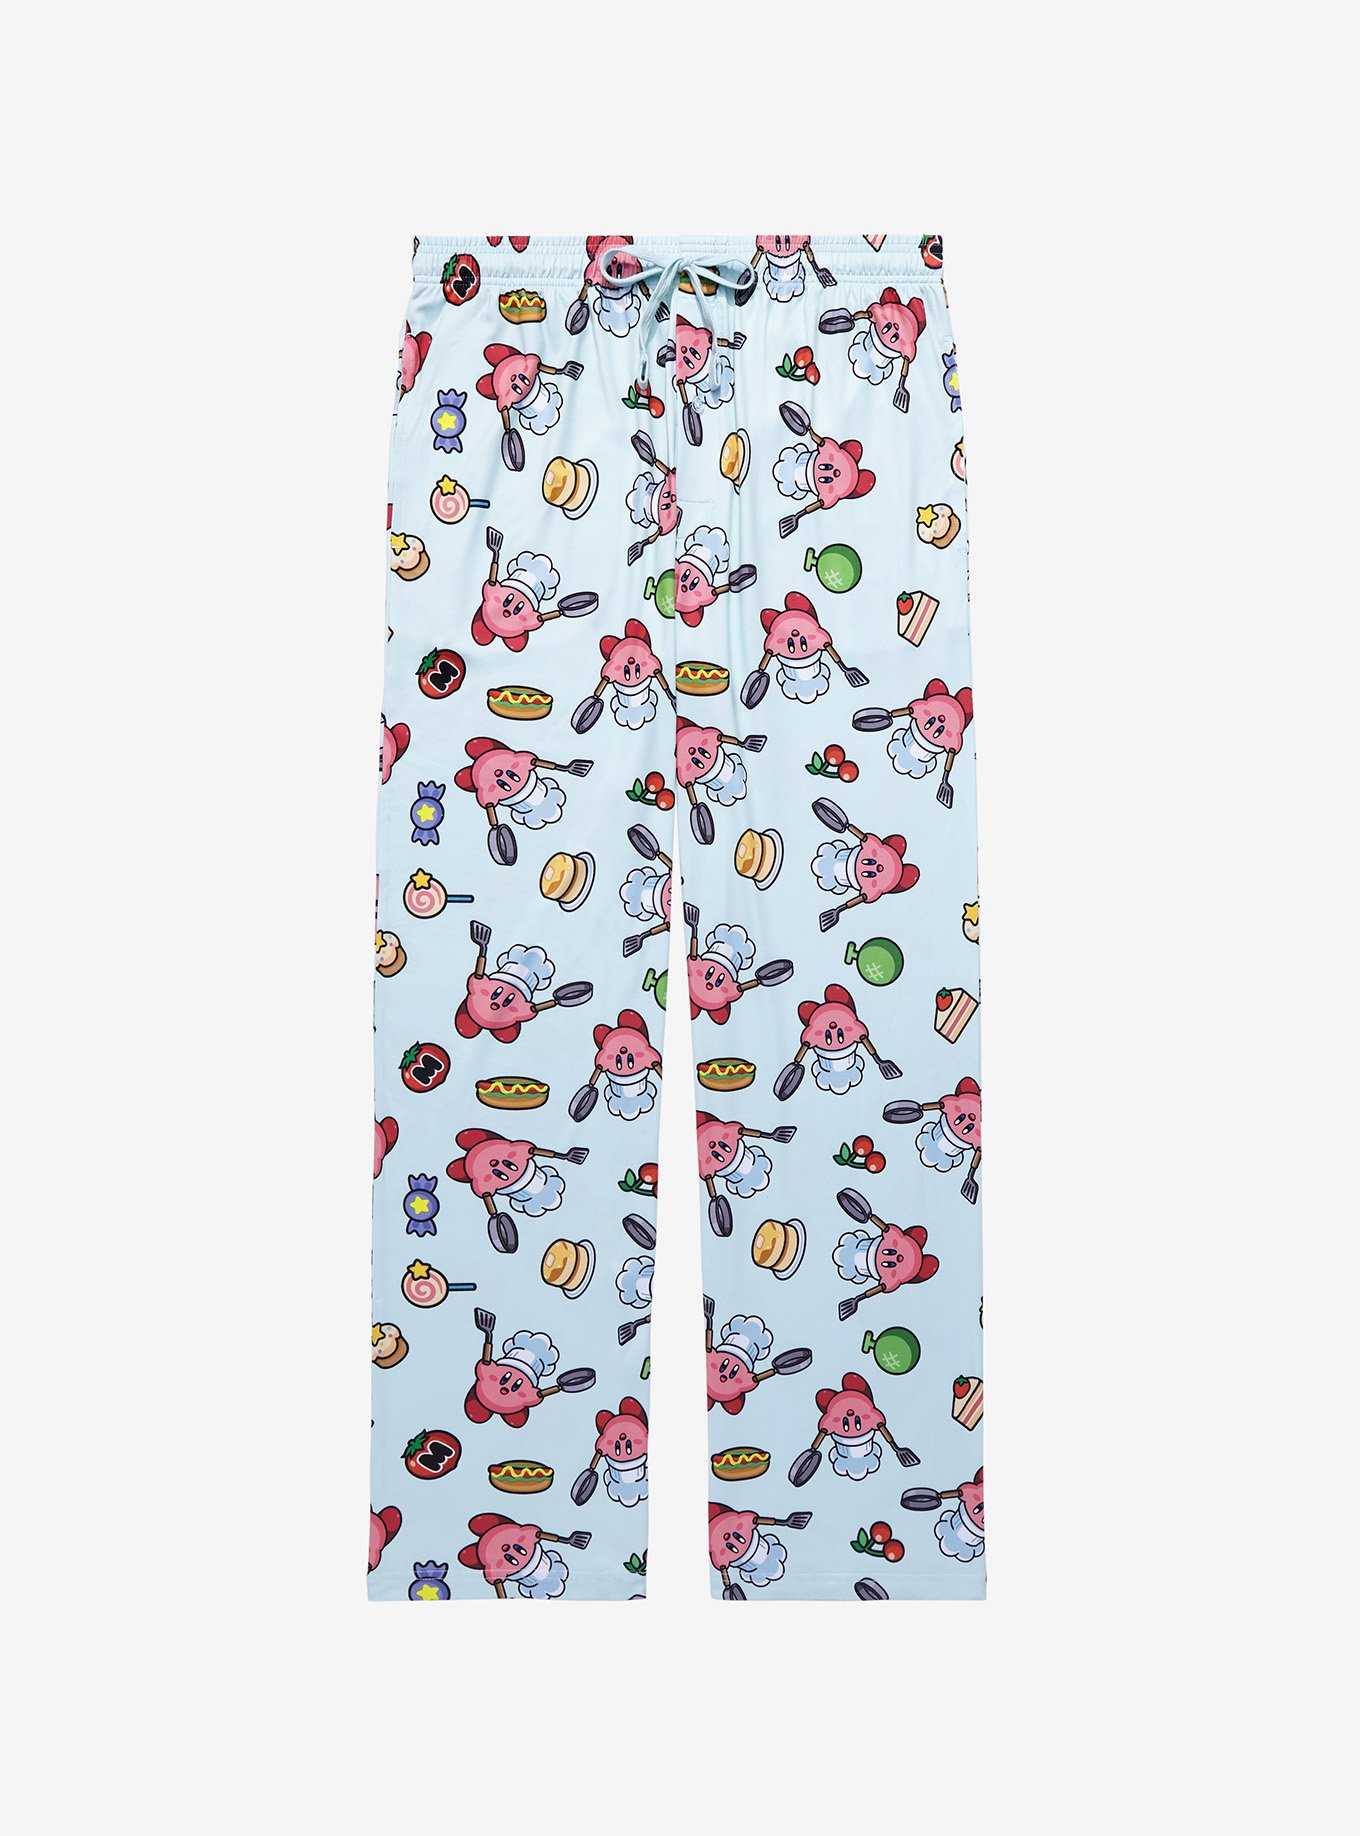 Mushroom Kingdom Collection - Peach & Toad Women's Joggers - XS - Nintendo  Official Site